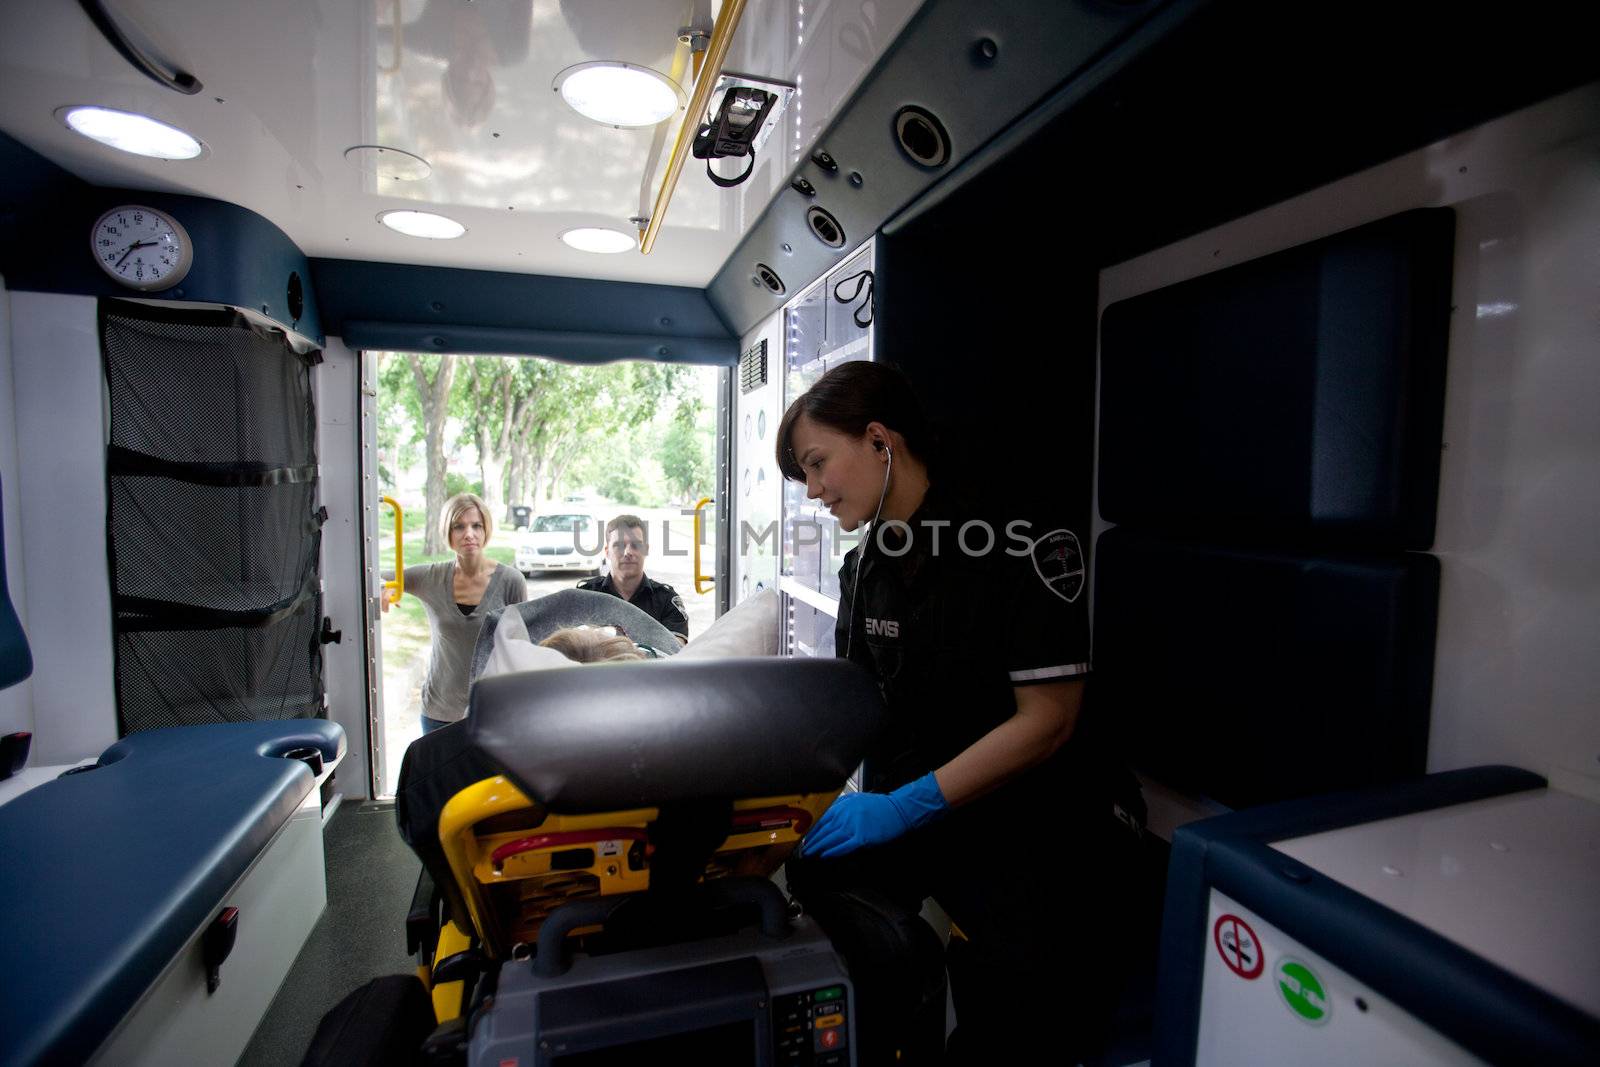 Ambulance Interior with Patient and Paramedic by leaf